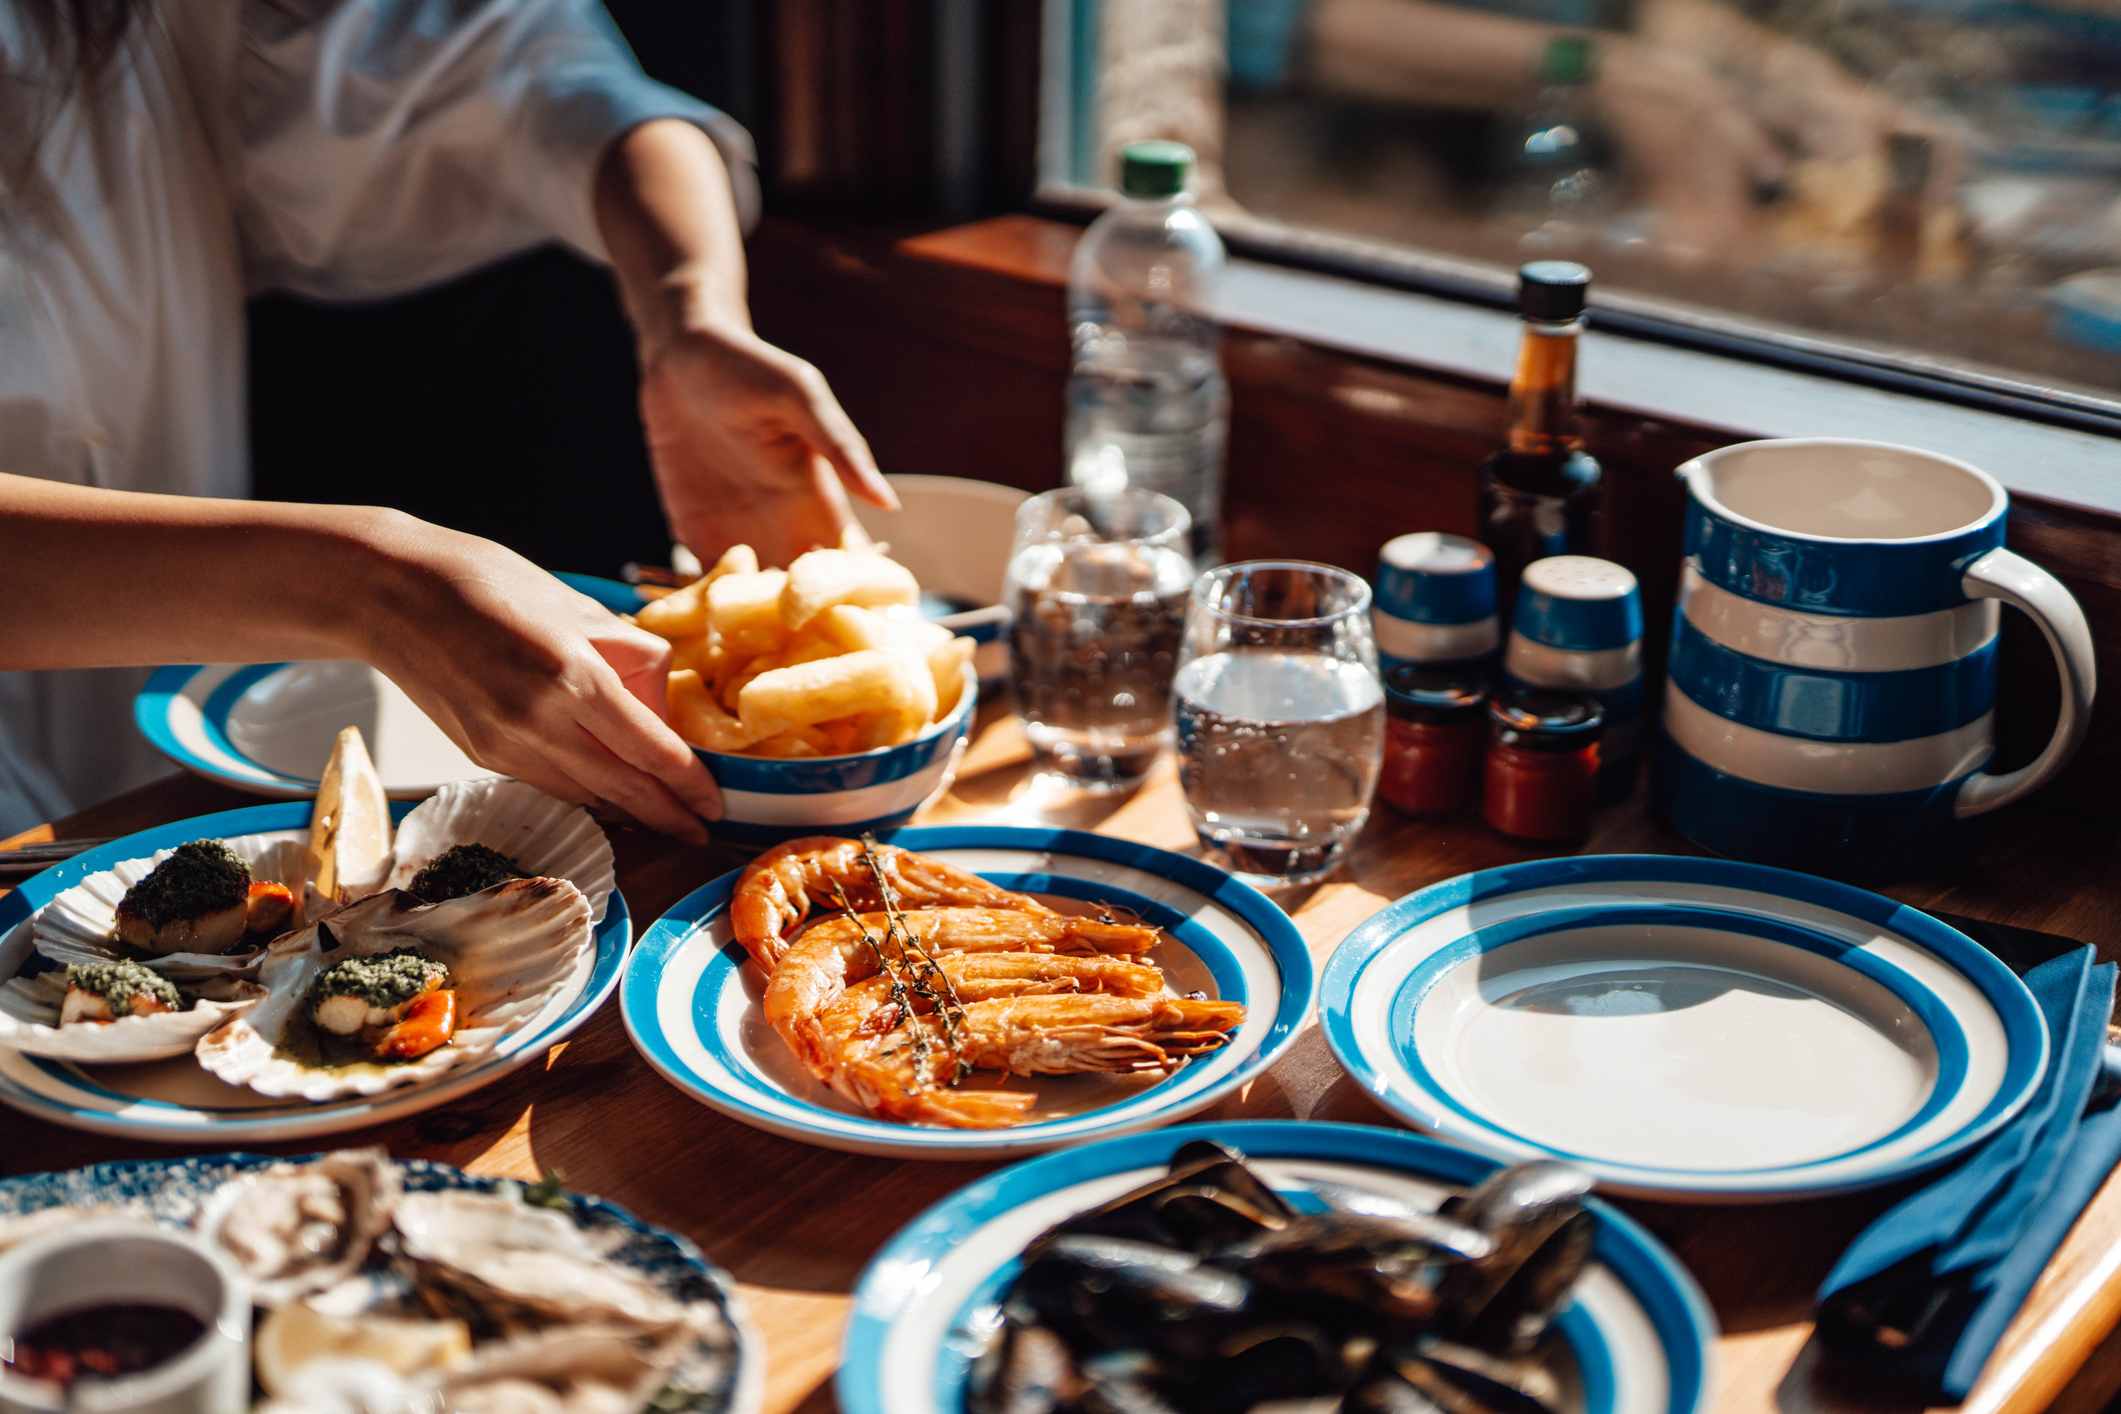 Person dining by window, seafood platter with prawns, person reaching for fries